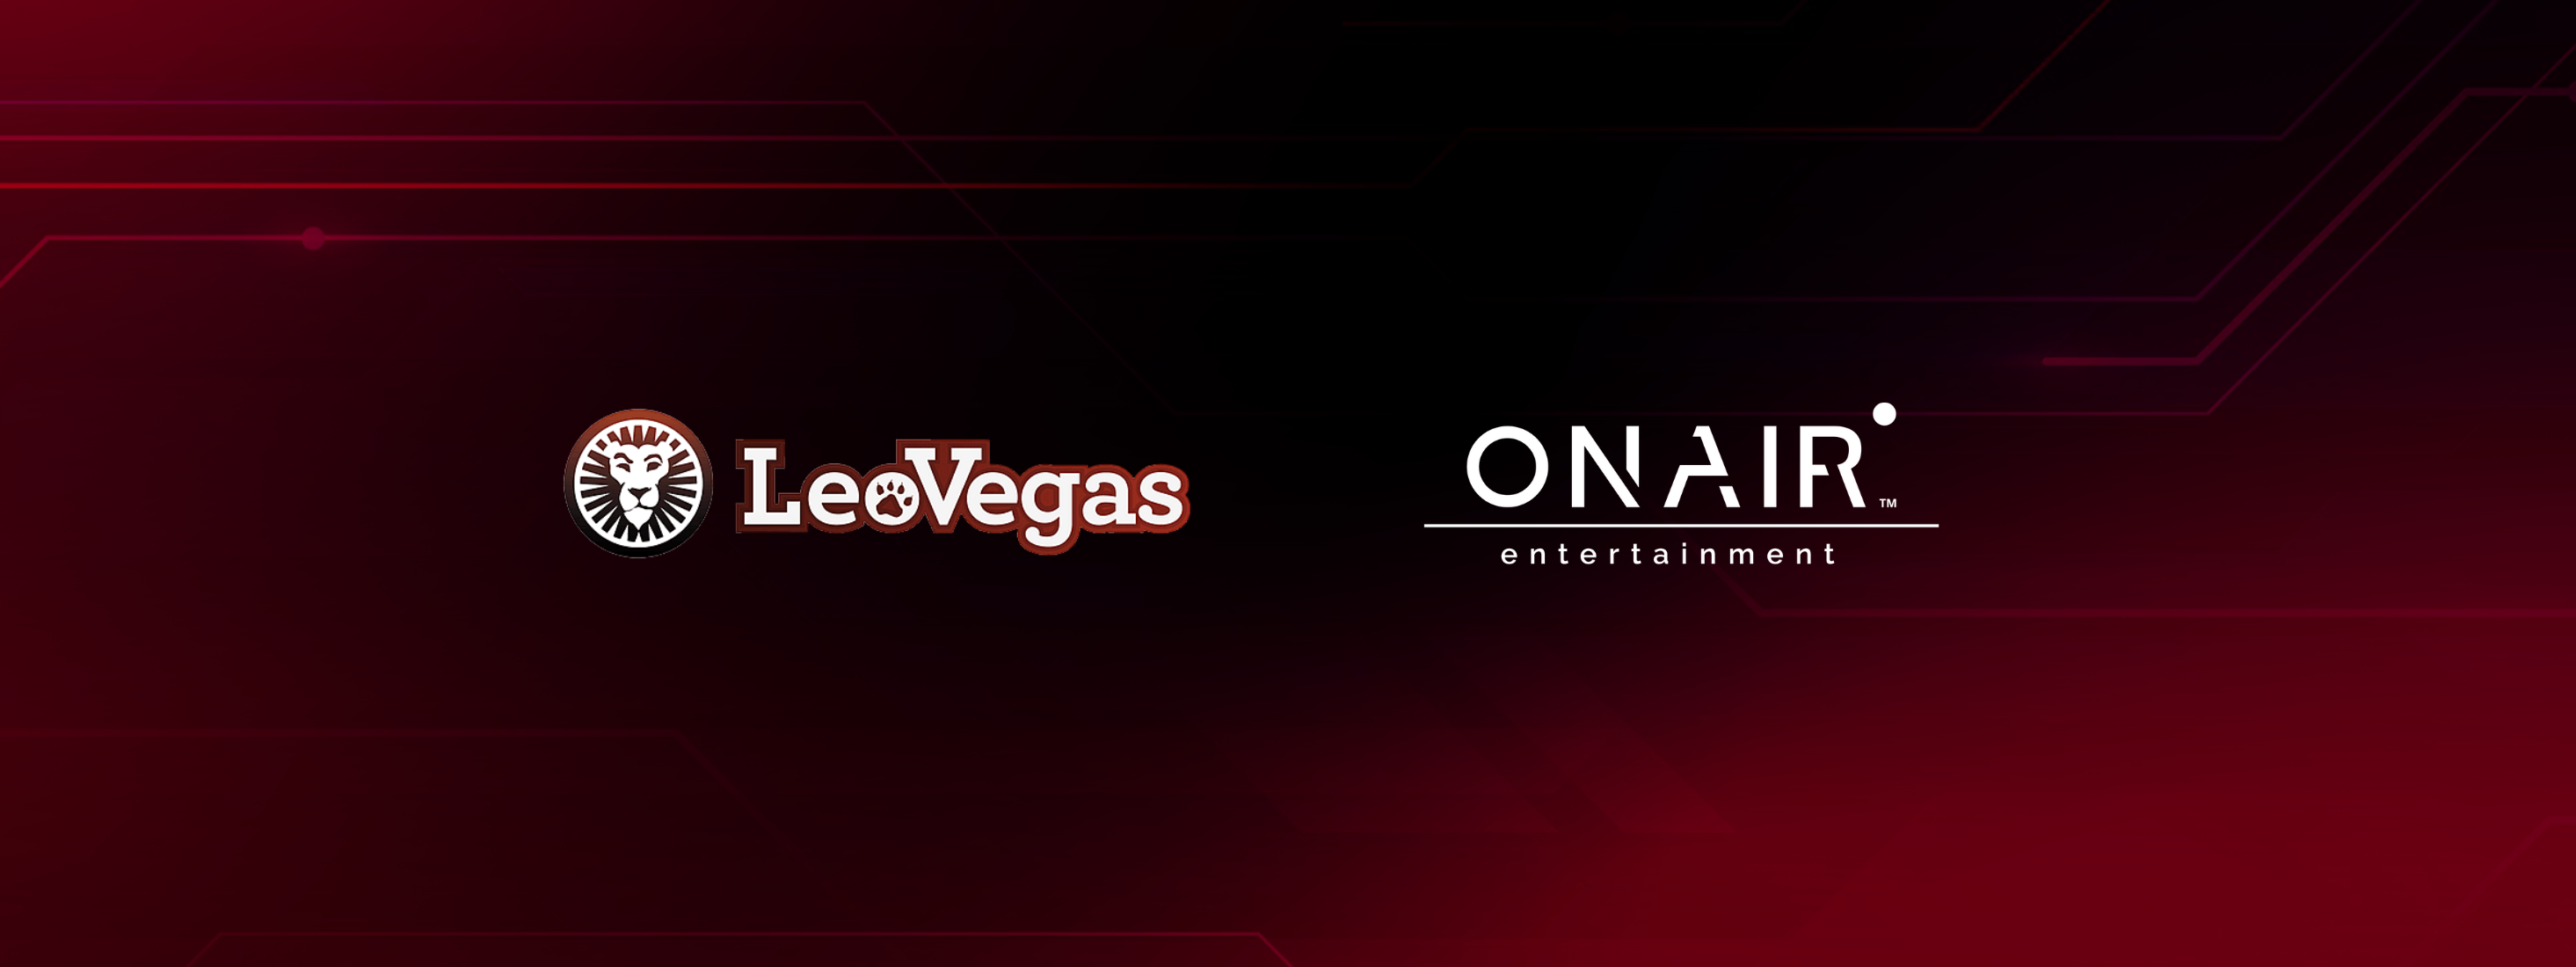 LeoVegas's and OnAir Entertainment's logos side-by-side against a dark red background to demonstrate their partnership agreement.